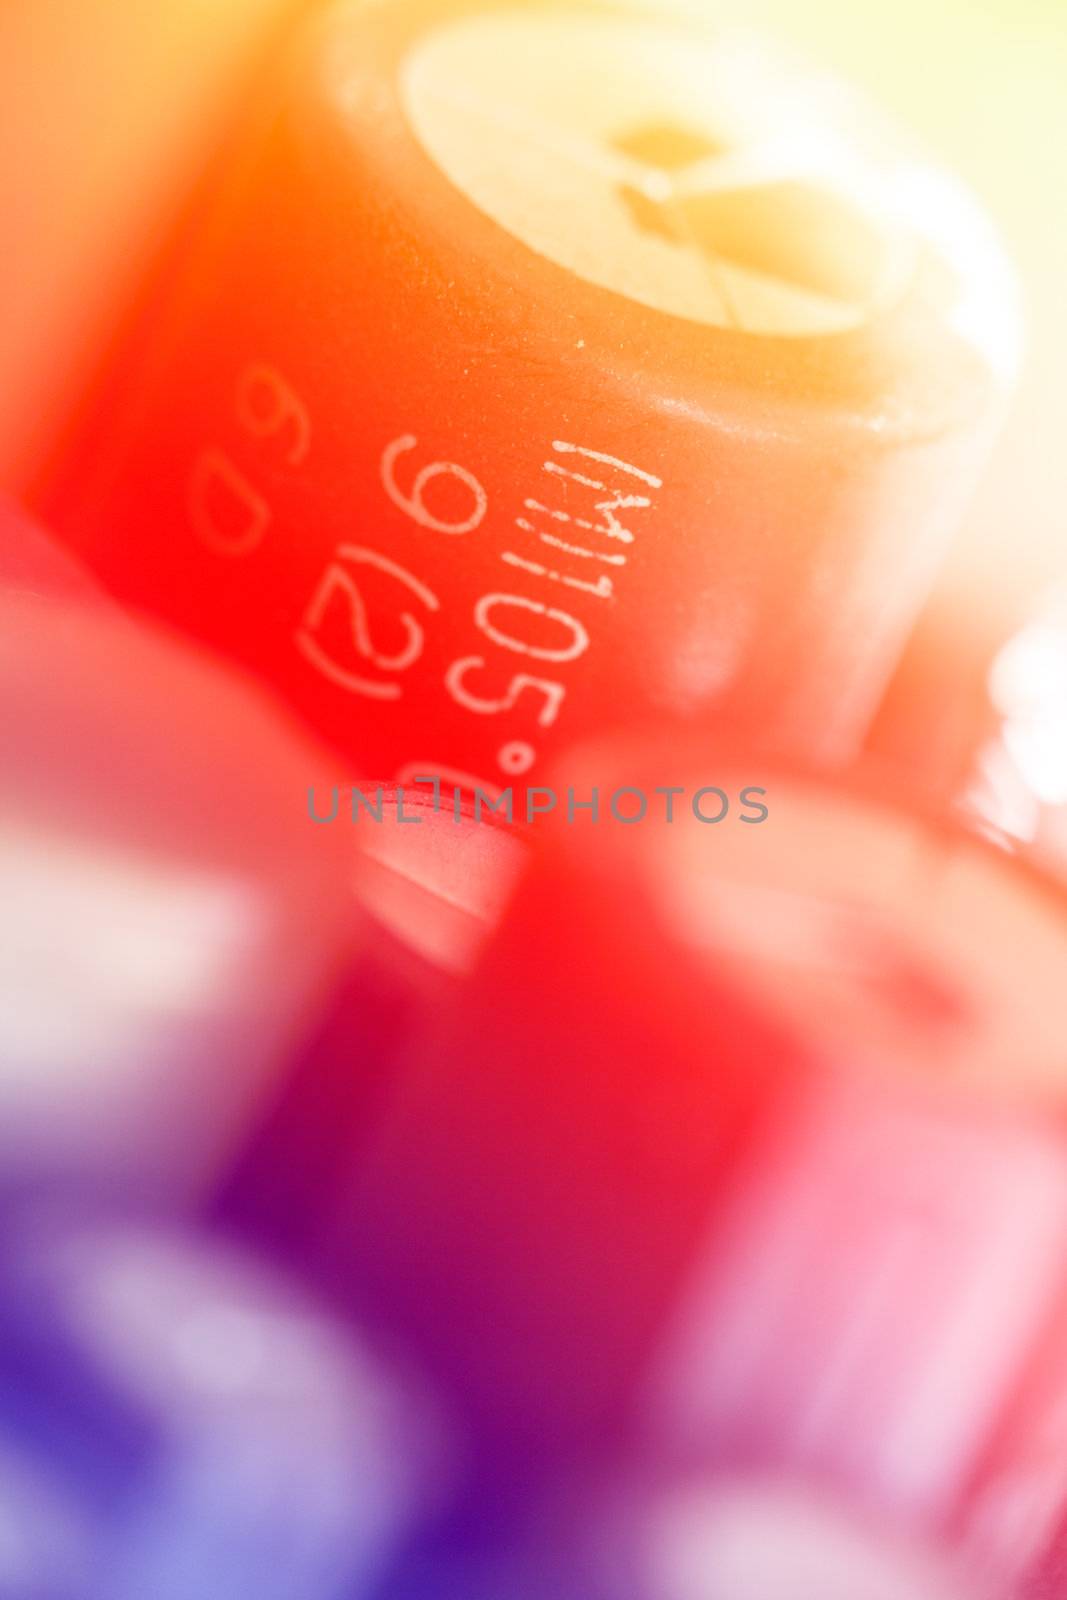 Colored electronic components (capasitors), shallow depth of field